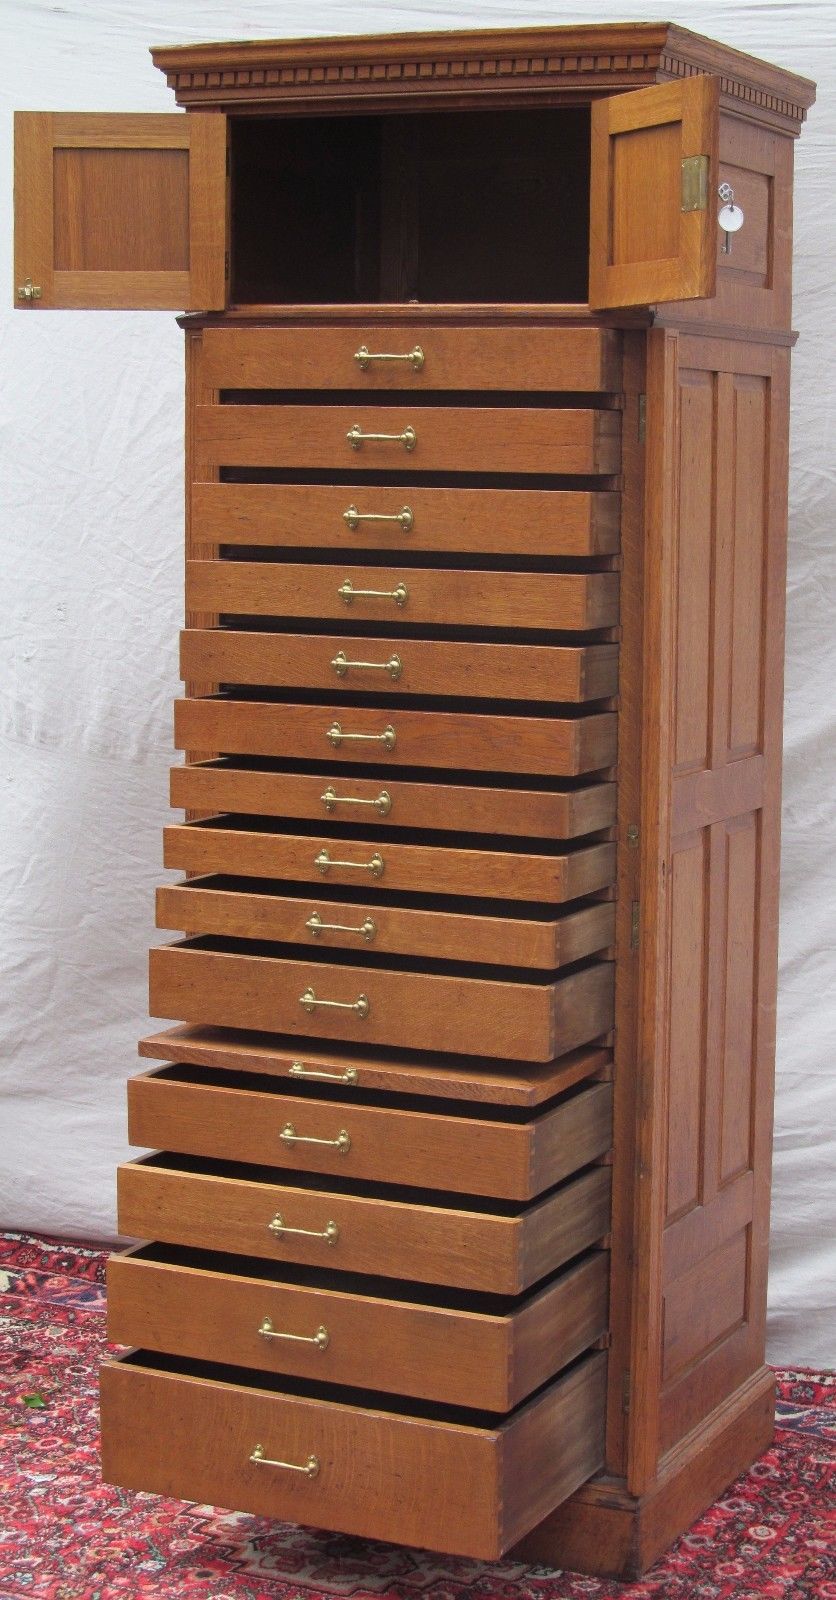 14 DRAWER OAK RAISED PANELED LOCKSIDE JEWELERS CABINET-THE ABSOLUTE FINEST!!! - Bay Colony Antiques File Cabinet